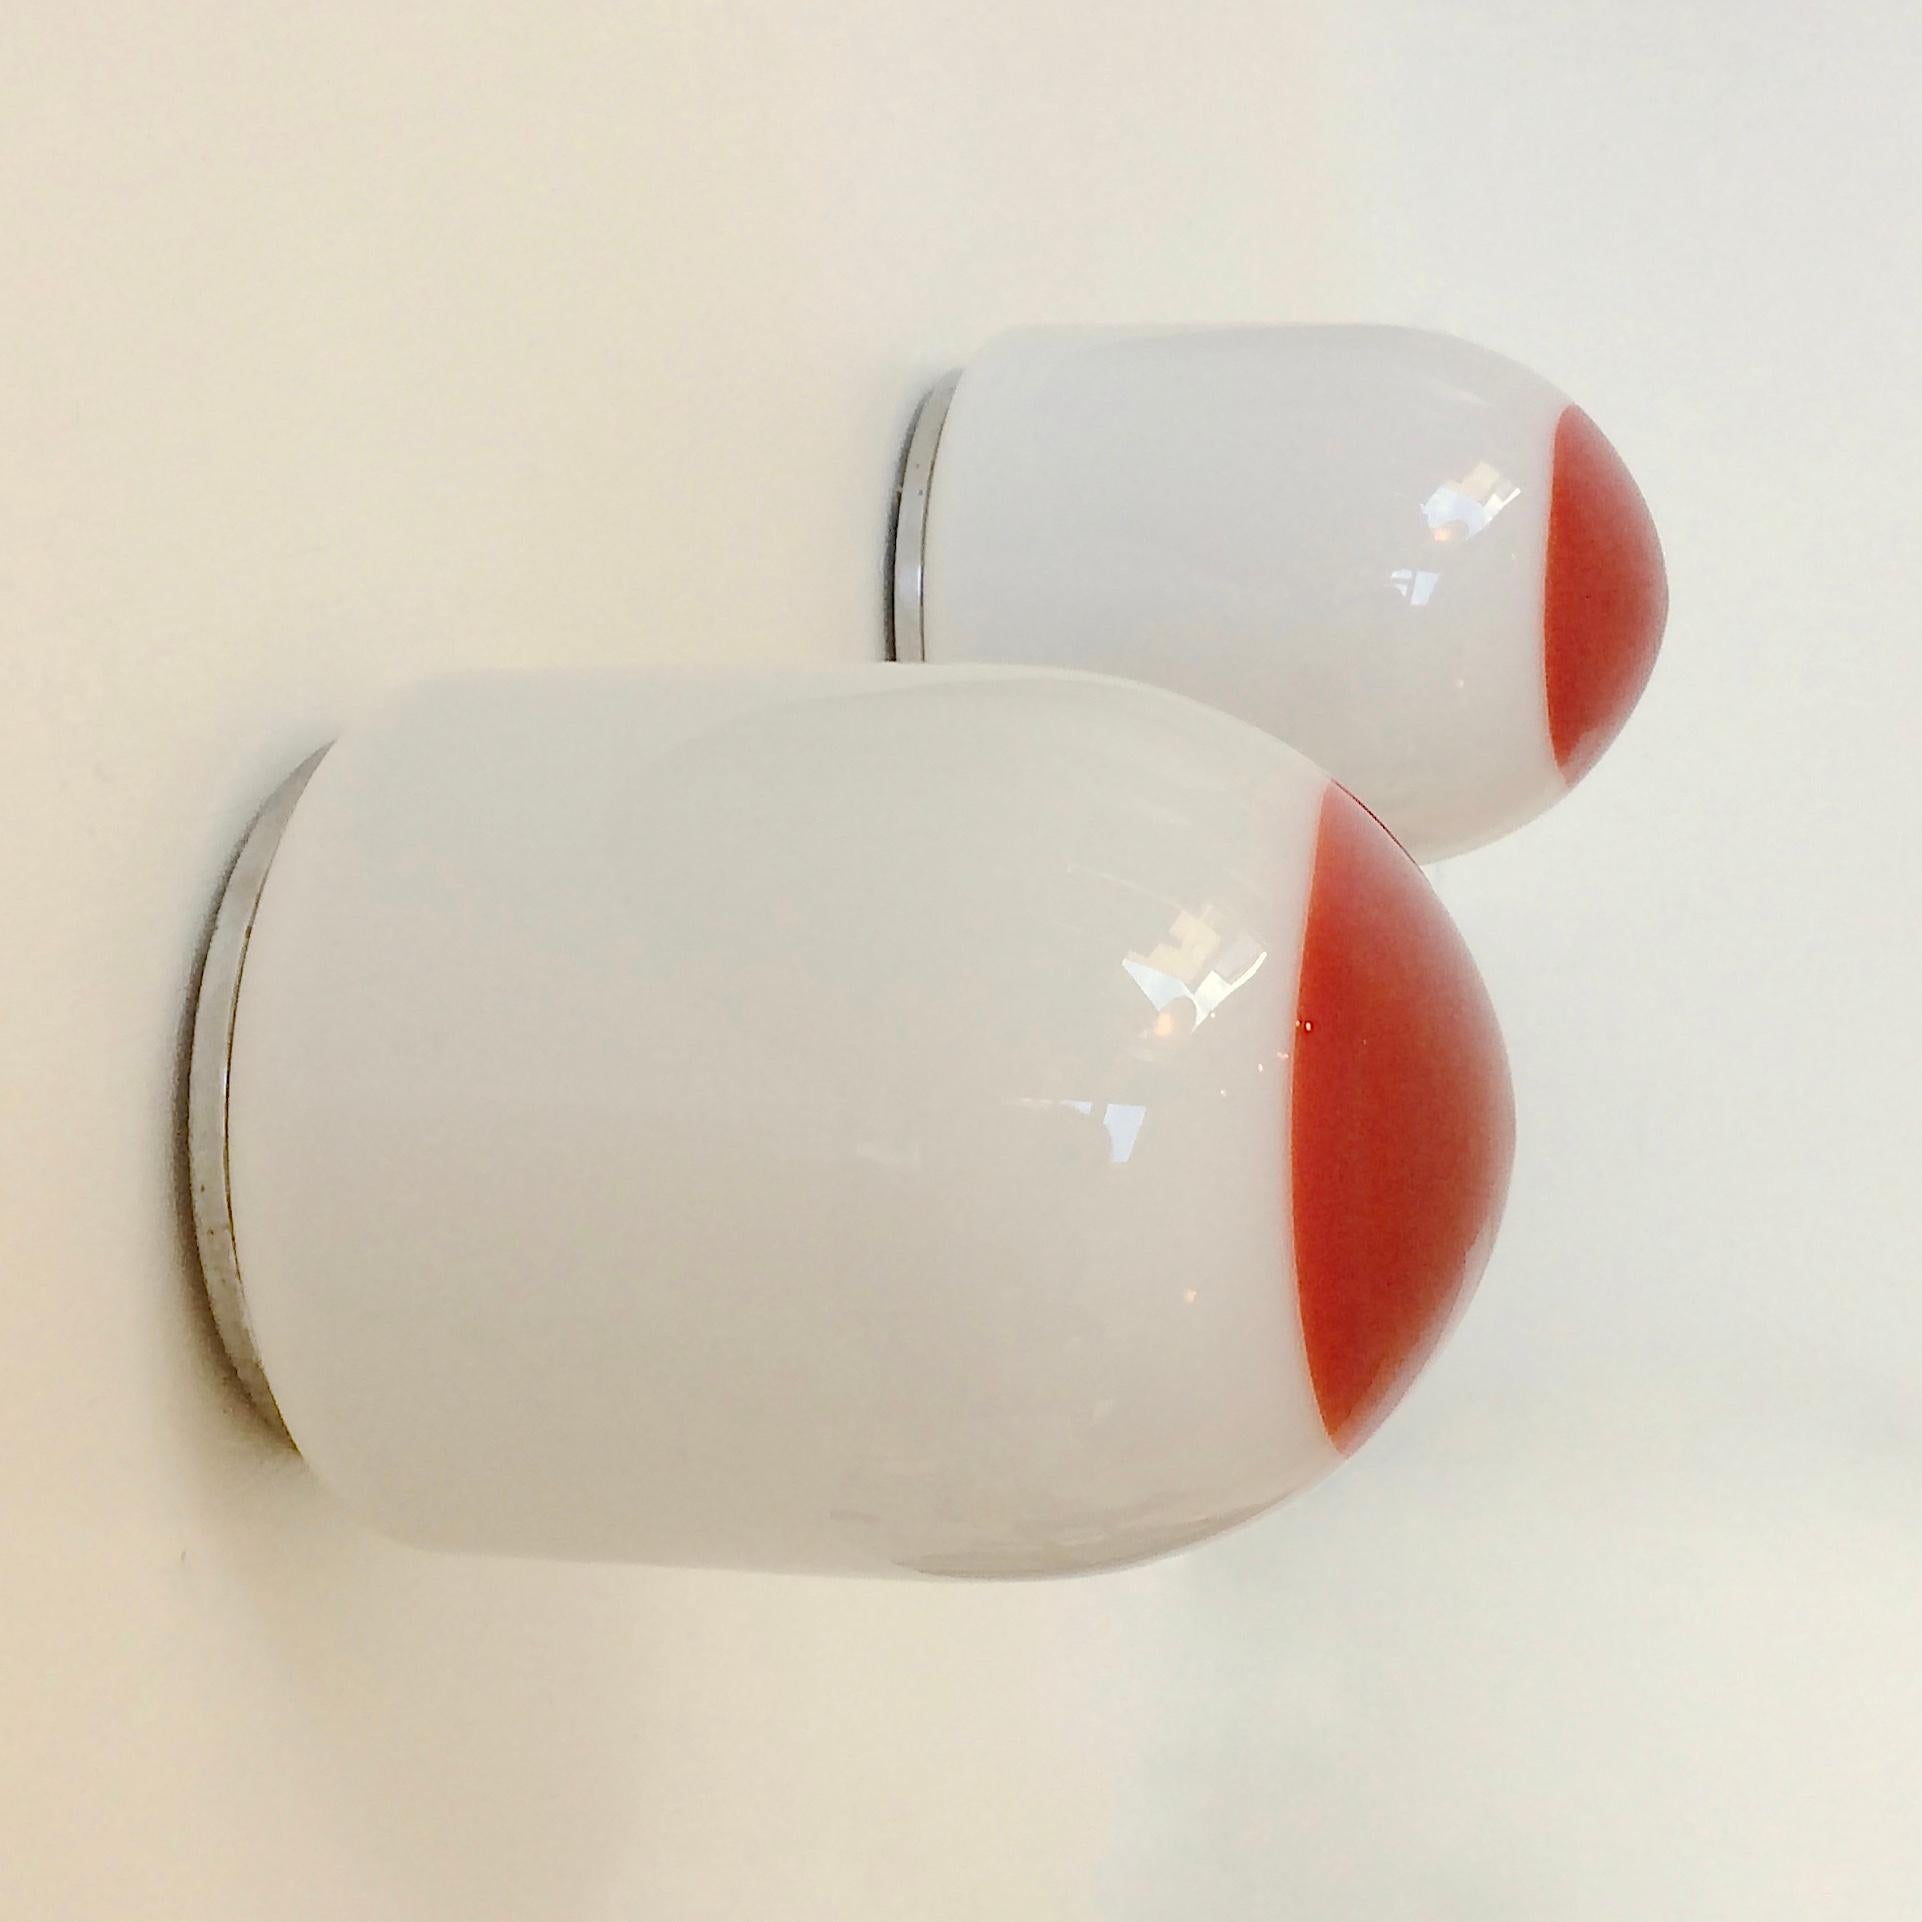 Nice Murano pair of sconces, Din Punto model, Renato Toso for Leucos, circa 1972, Italy.
White Murano glass with round red tip, round metal base.
One E27 bulb of 40W.
Dimensions: 14 cm D, 11 cm diameter.
All purchases are covered by our Buyer